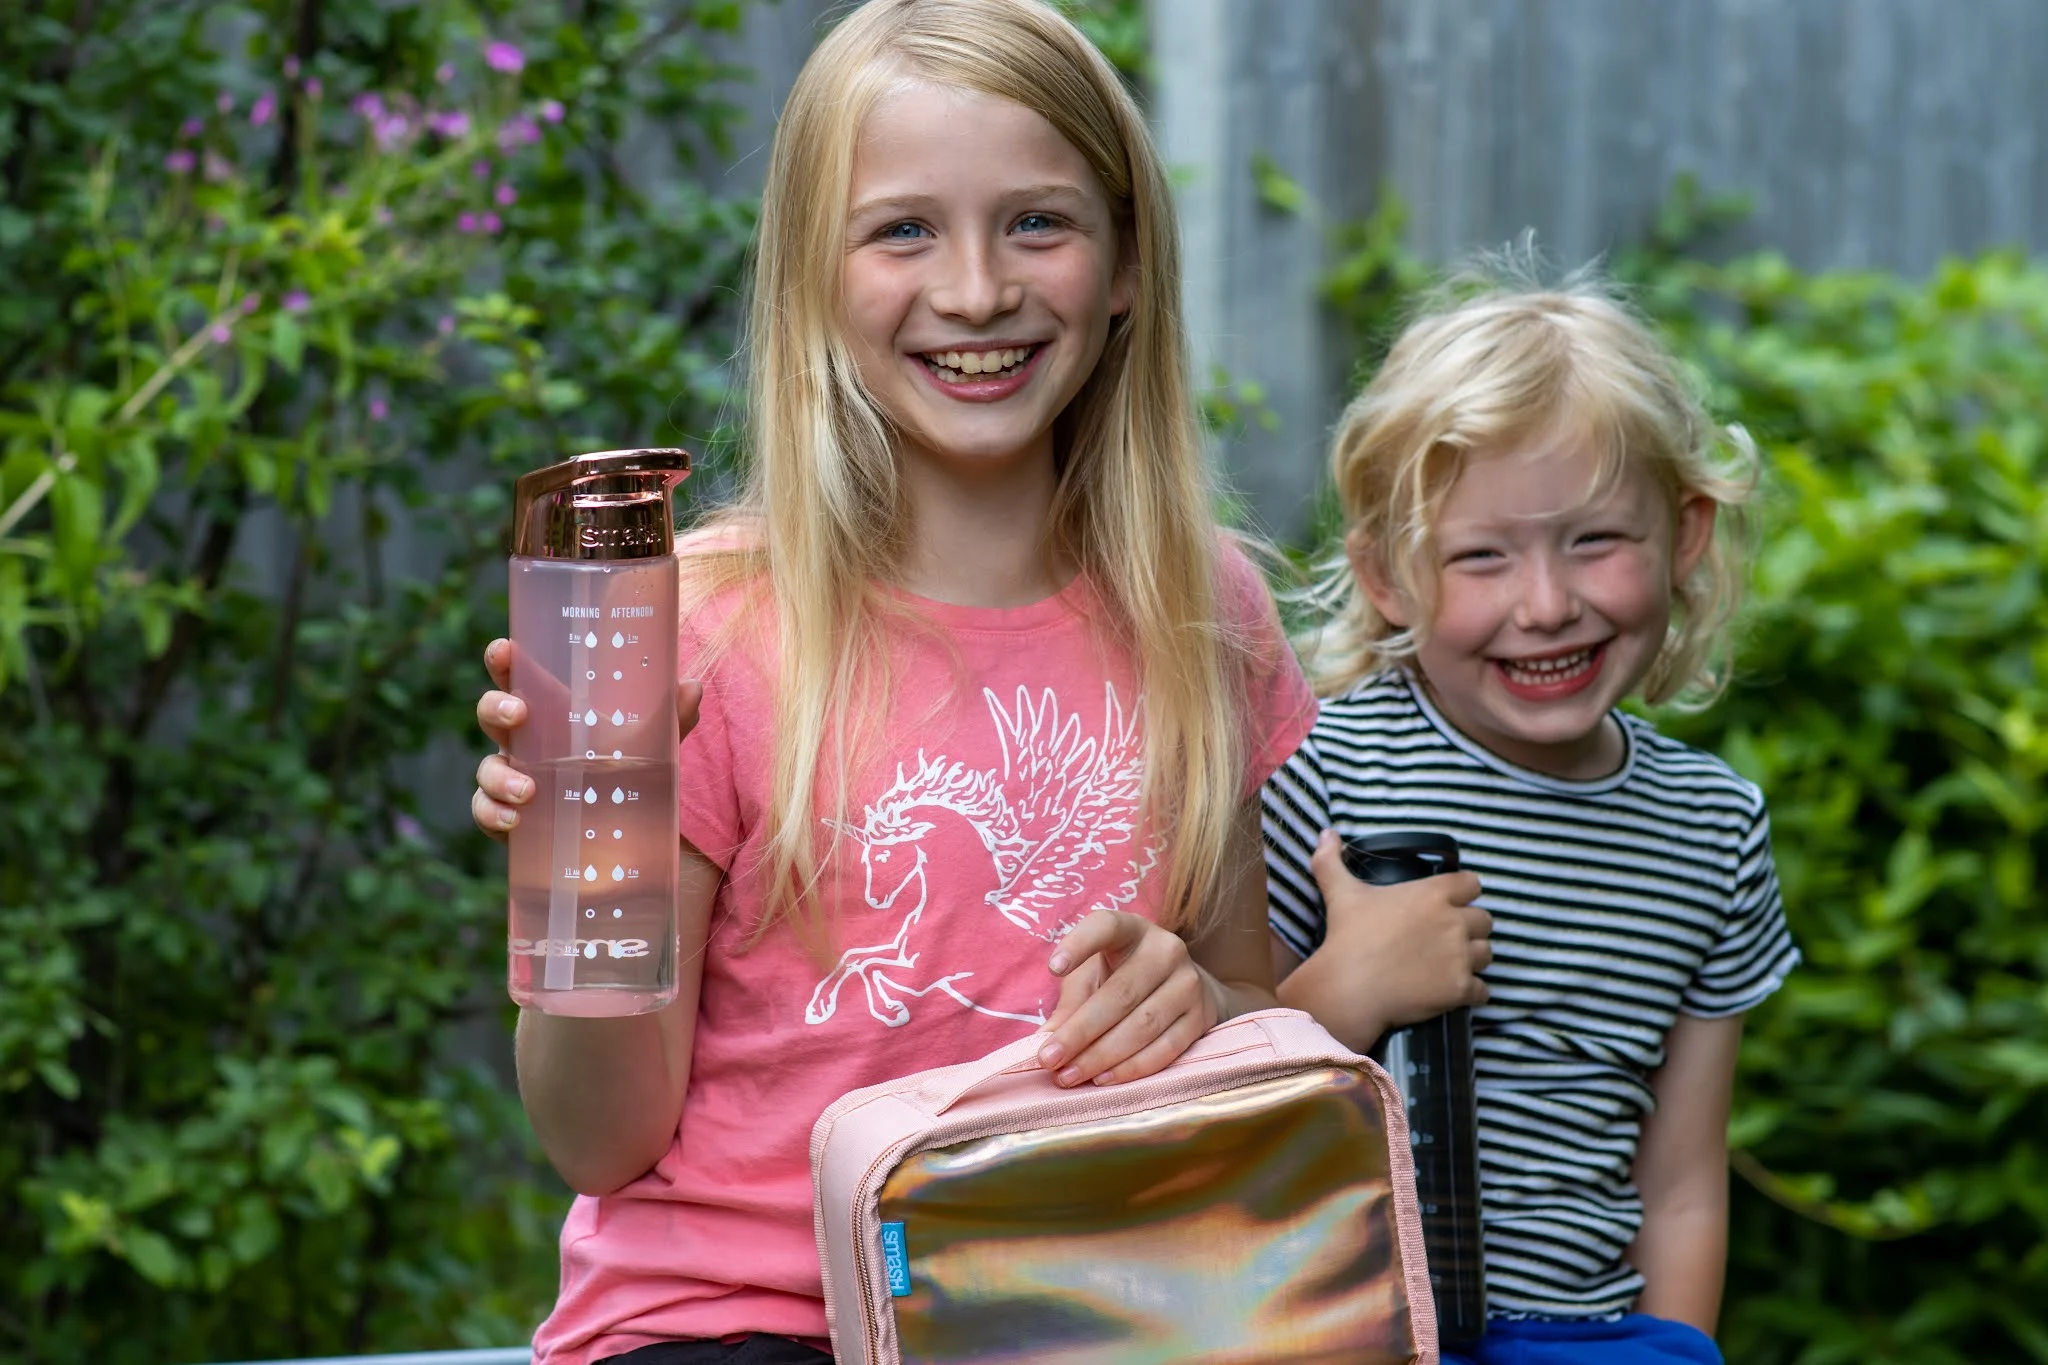 Two girls in a garden one with a SMASH rose gold water bottle and rose gold iridescent lunch bag, the other with a black water bottle